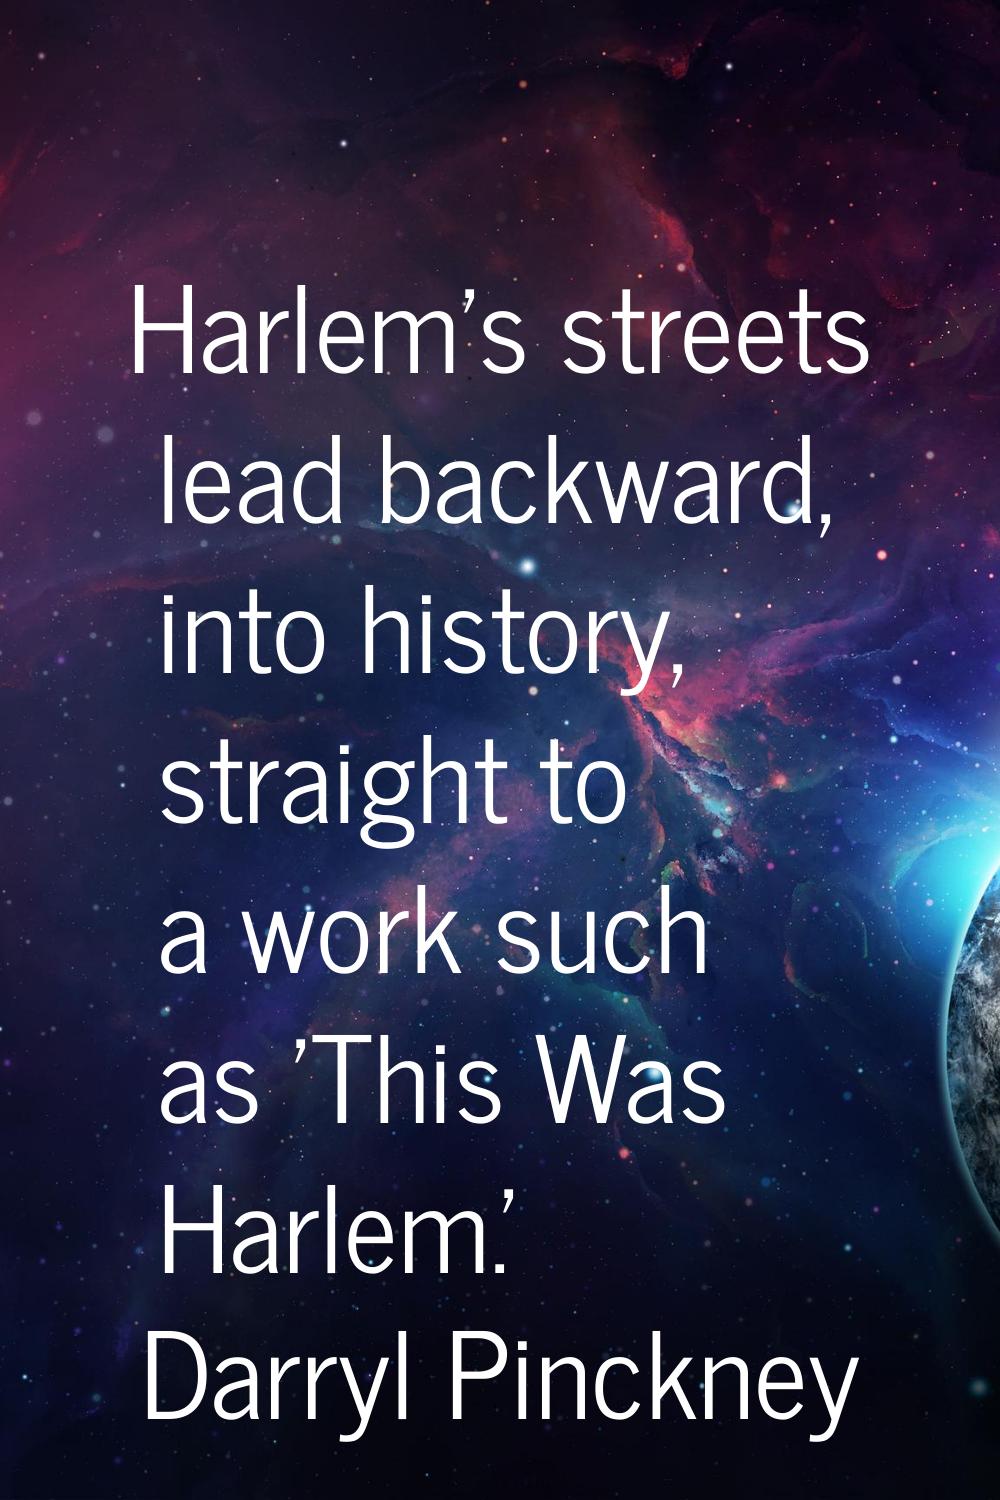 Harlem's streets lead backward, into history, straight to a work such as 'This Was Harlem.'